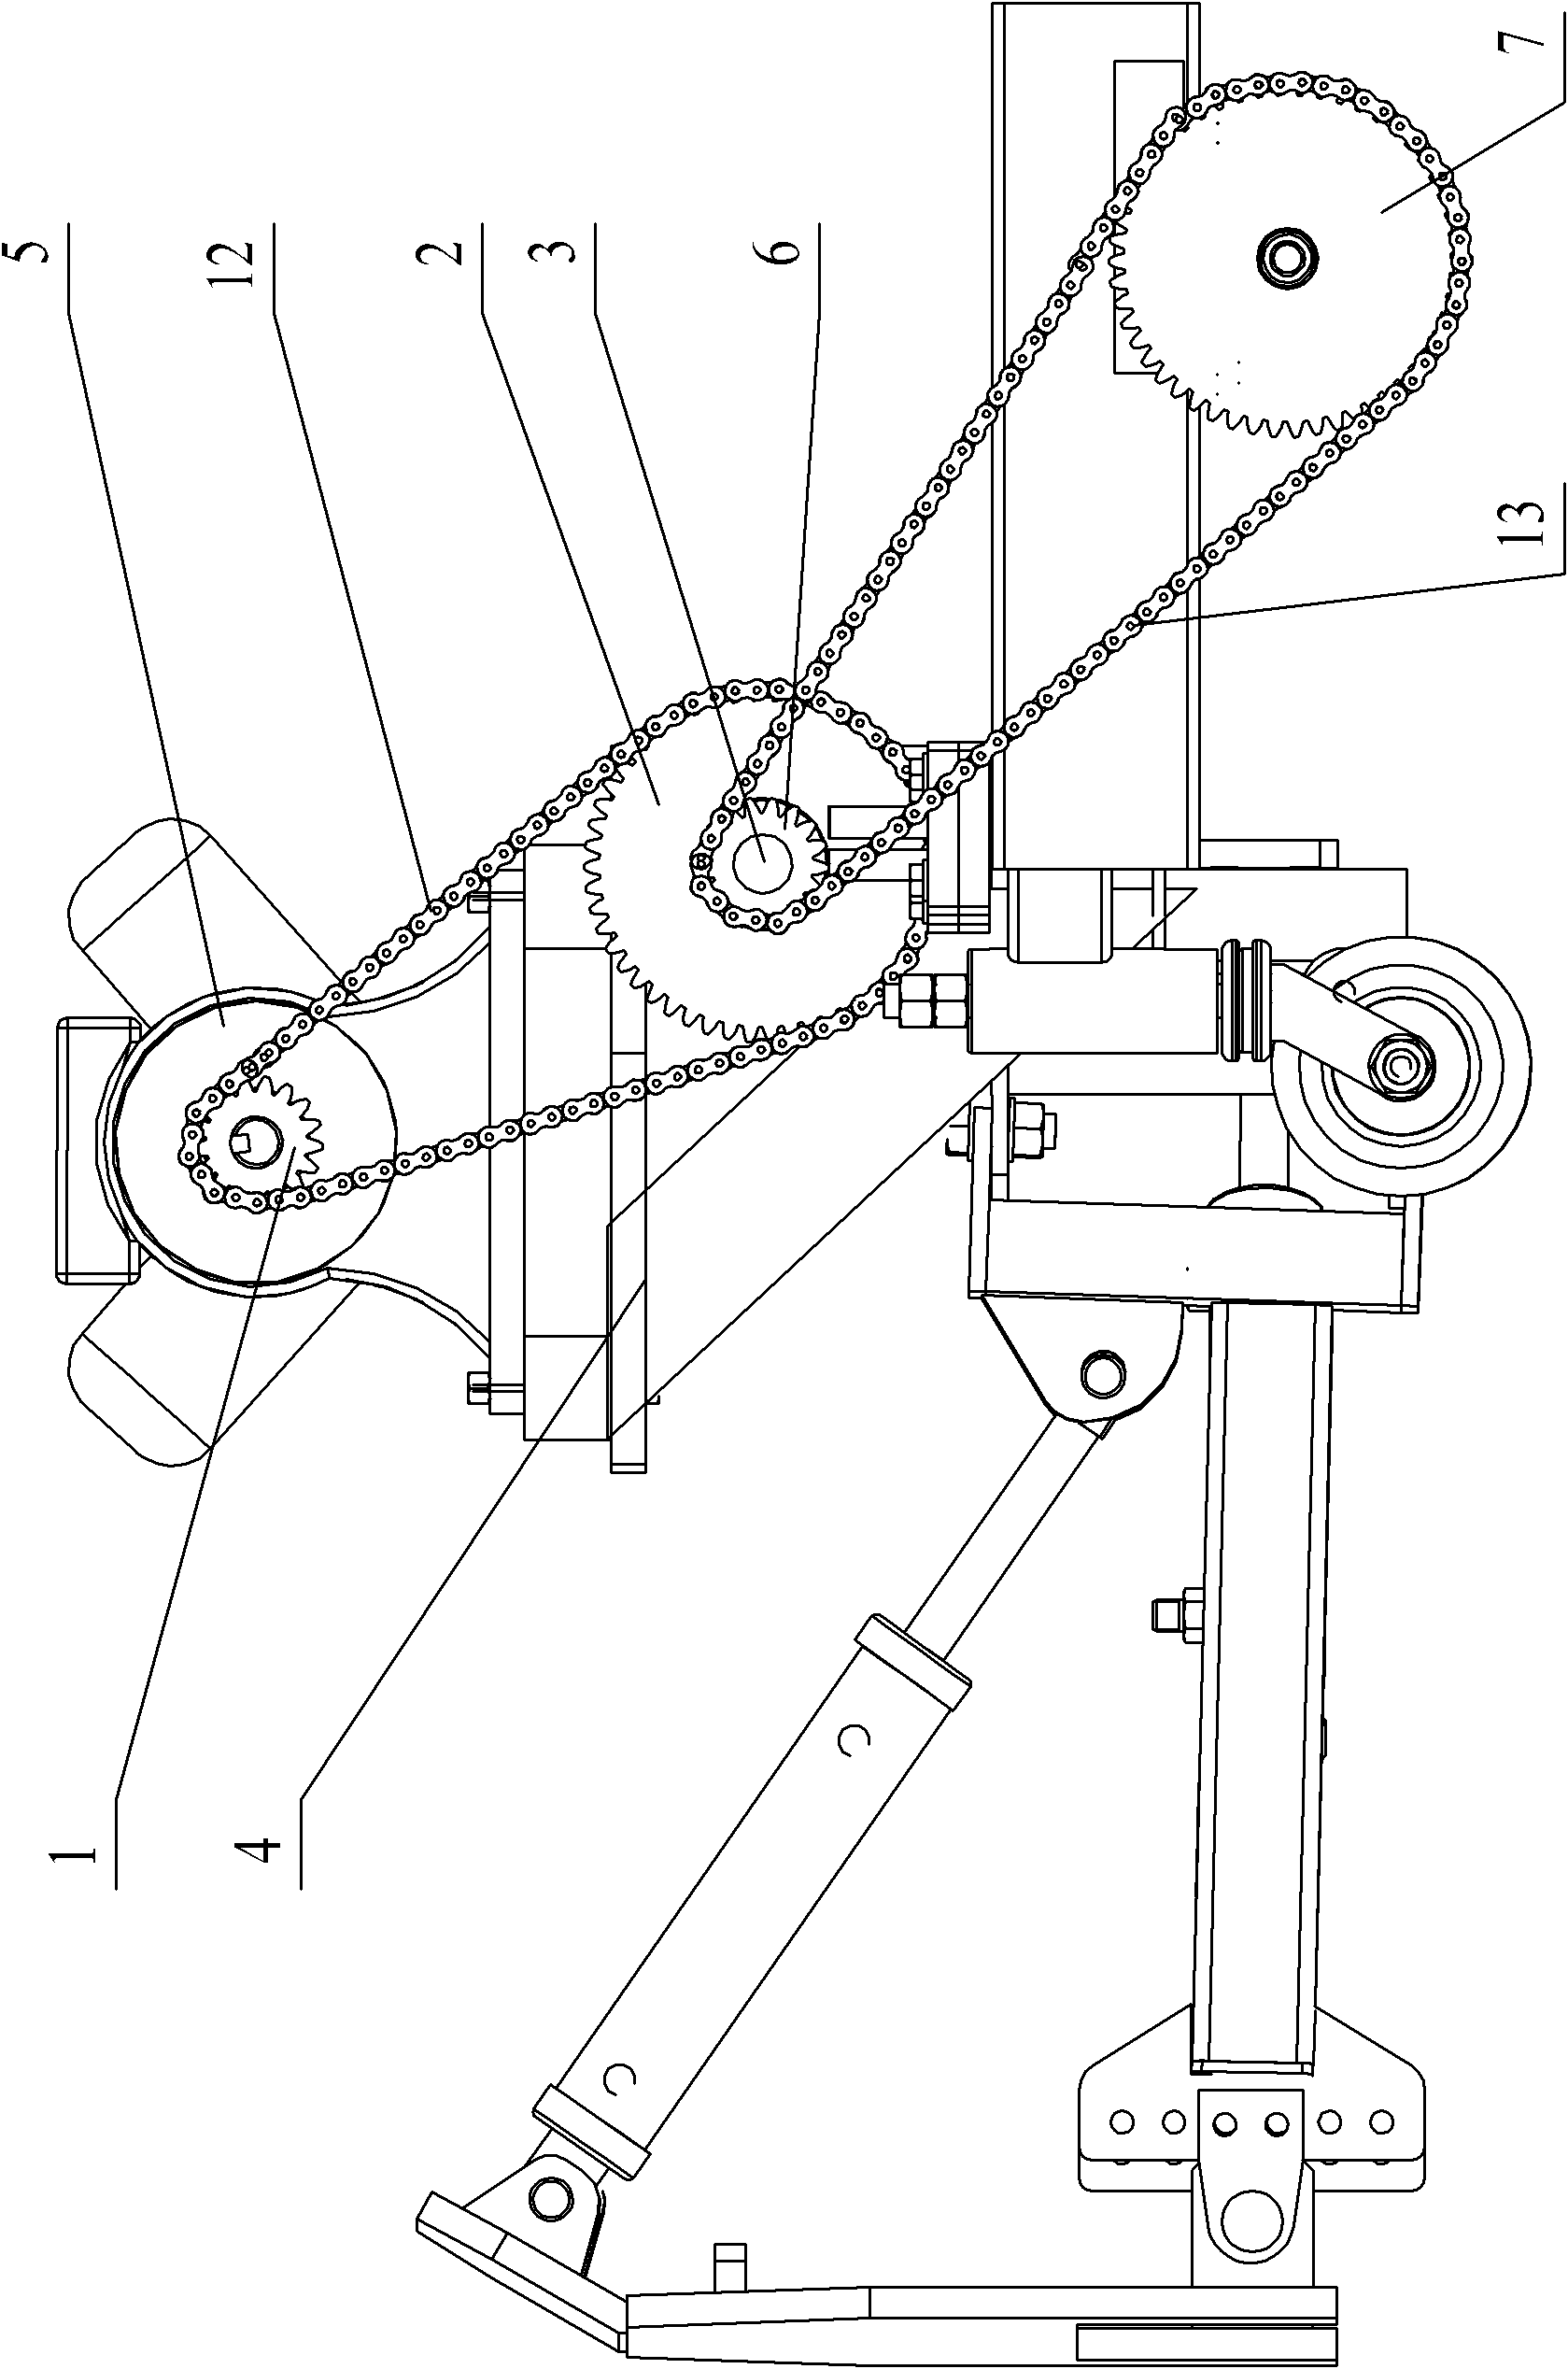 Inverted tooth chain output transmission device for snow caster